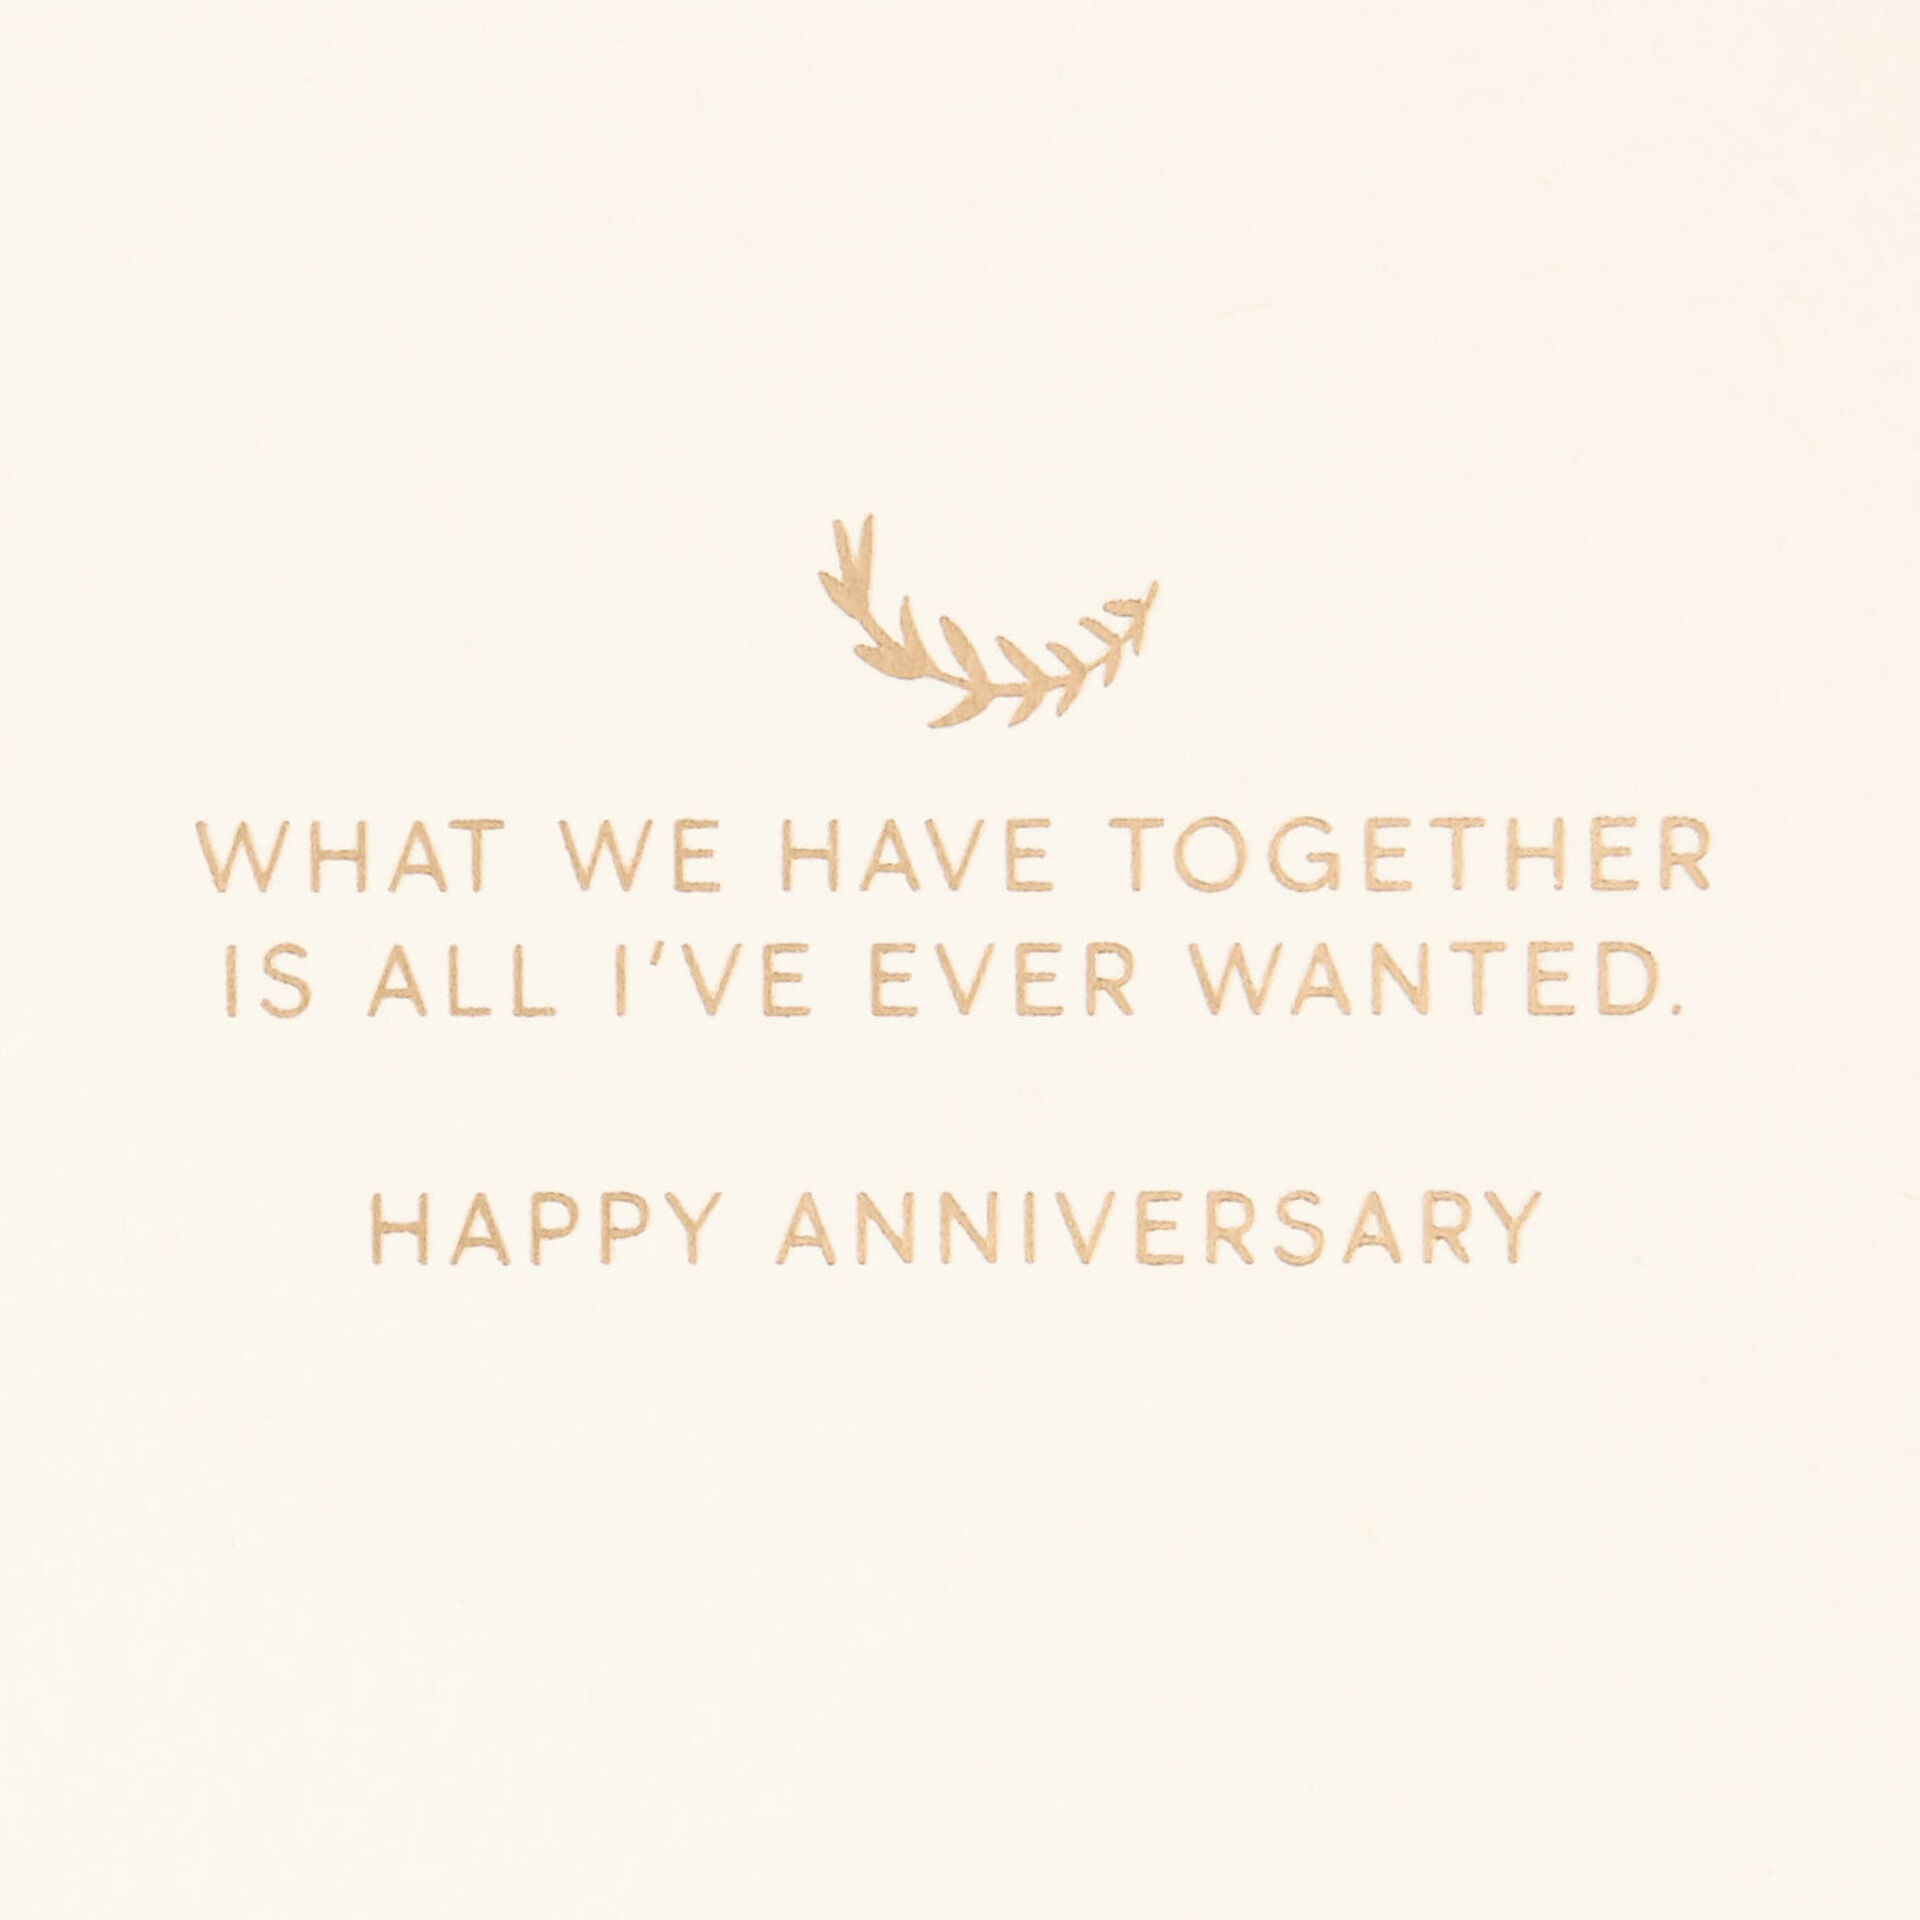 HeartShaped-Planter-With-Vines-Anniversary-Card_899LAD9585_02